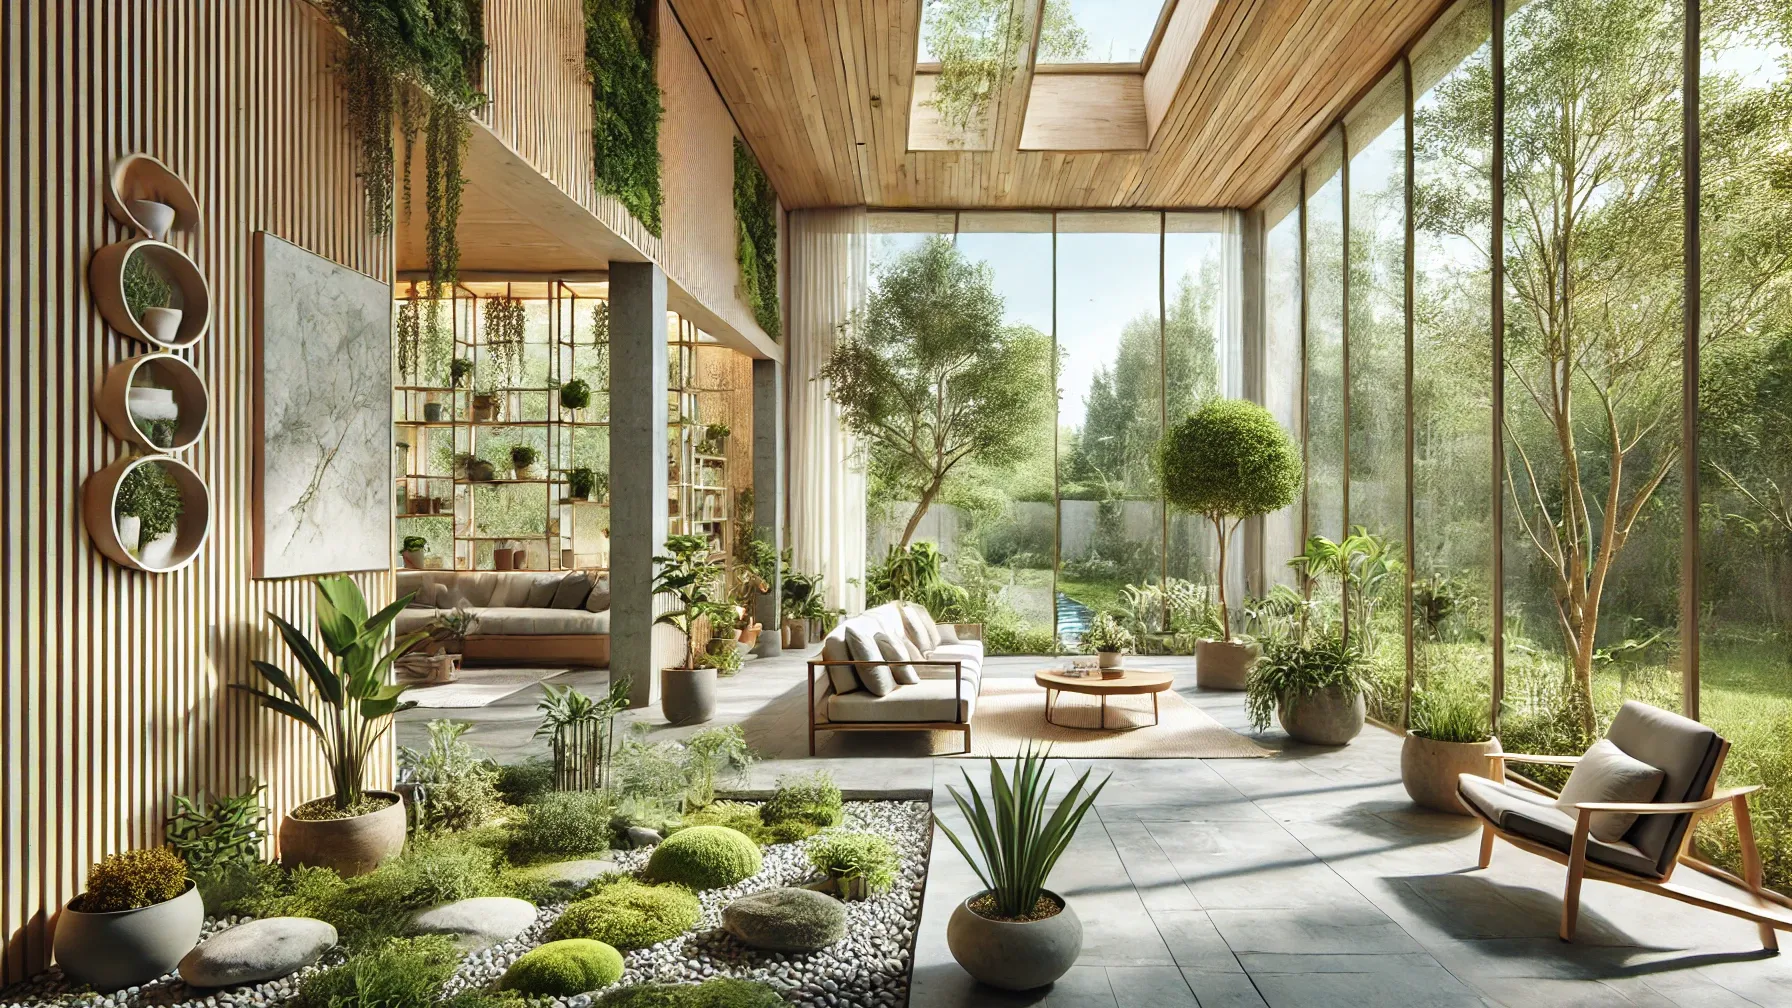 An interior space designed with biophilic principles